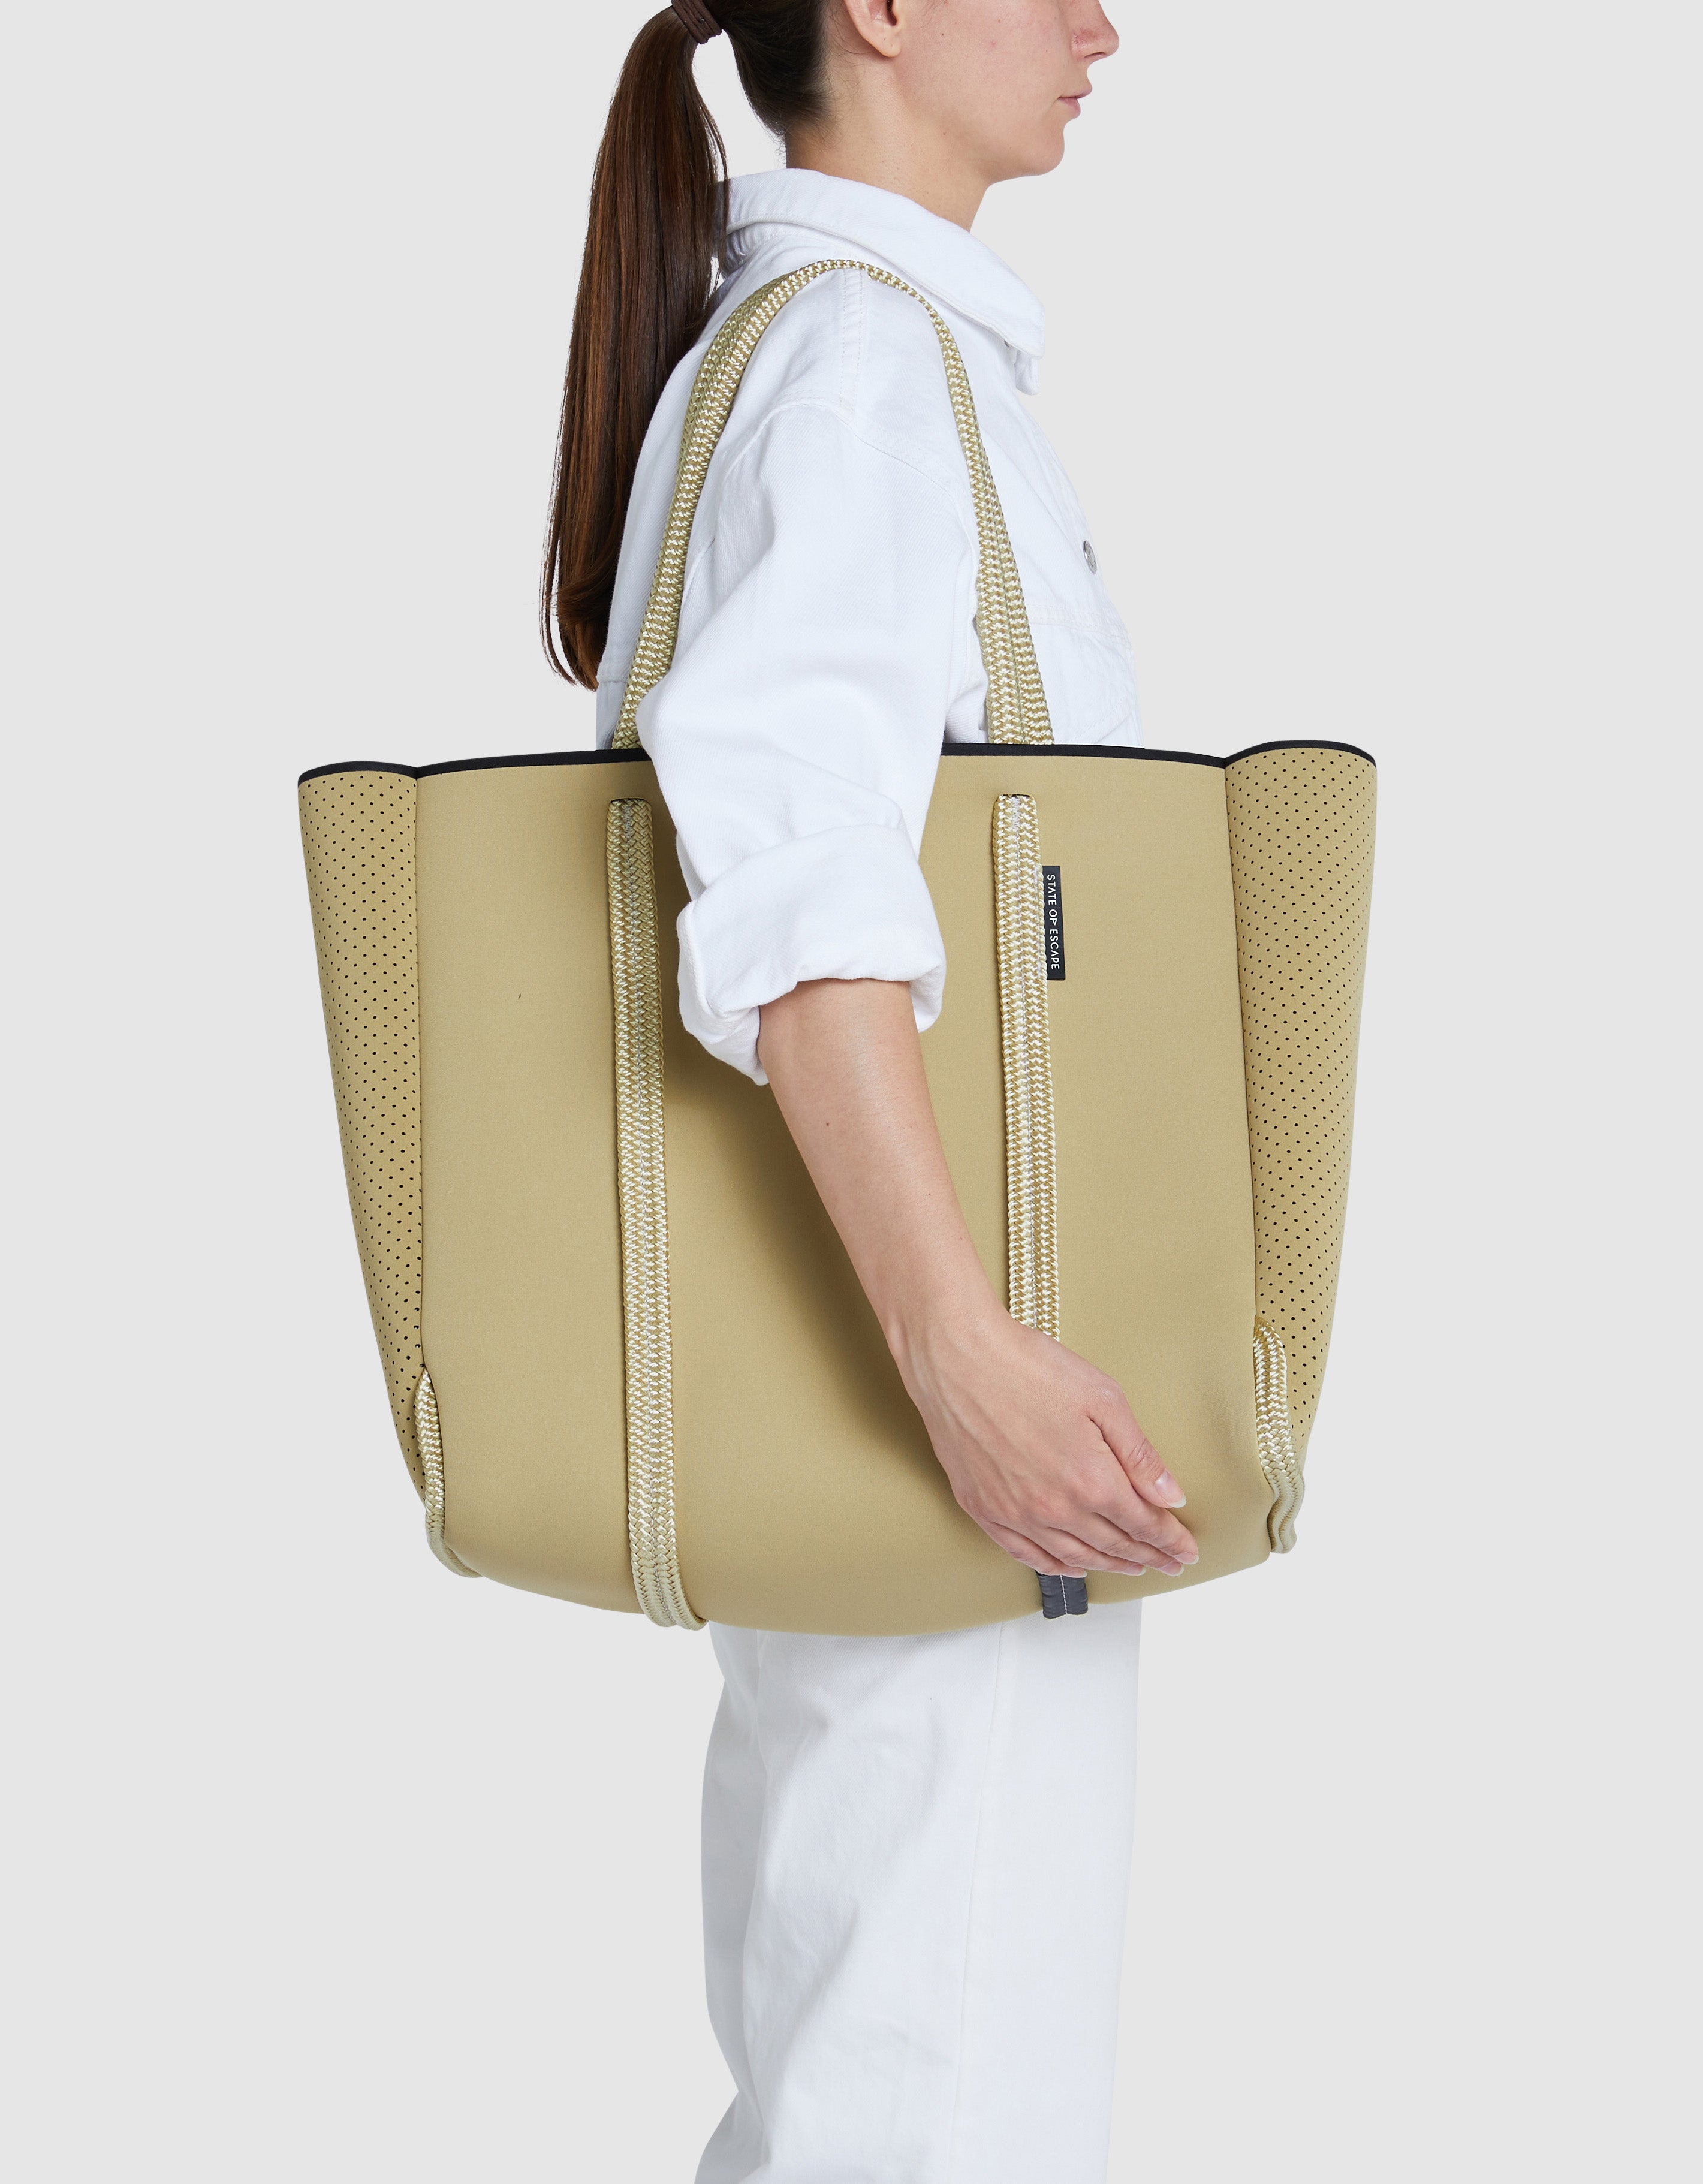 Satellite City tote in Washed Gold - State of Escape